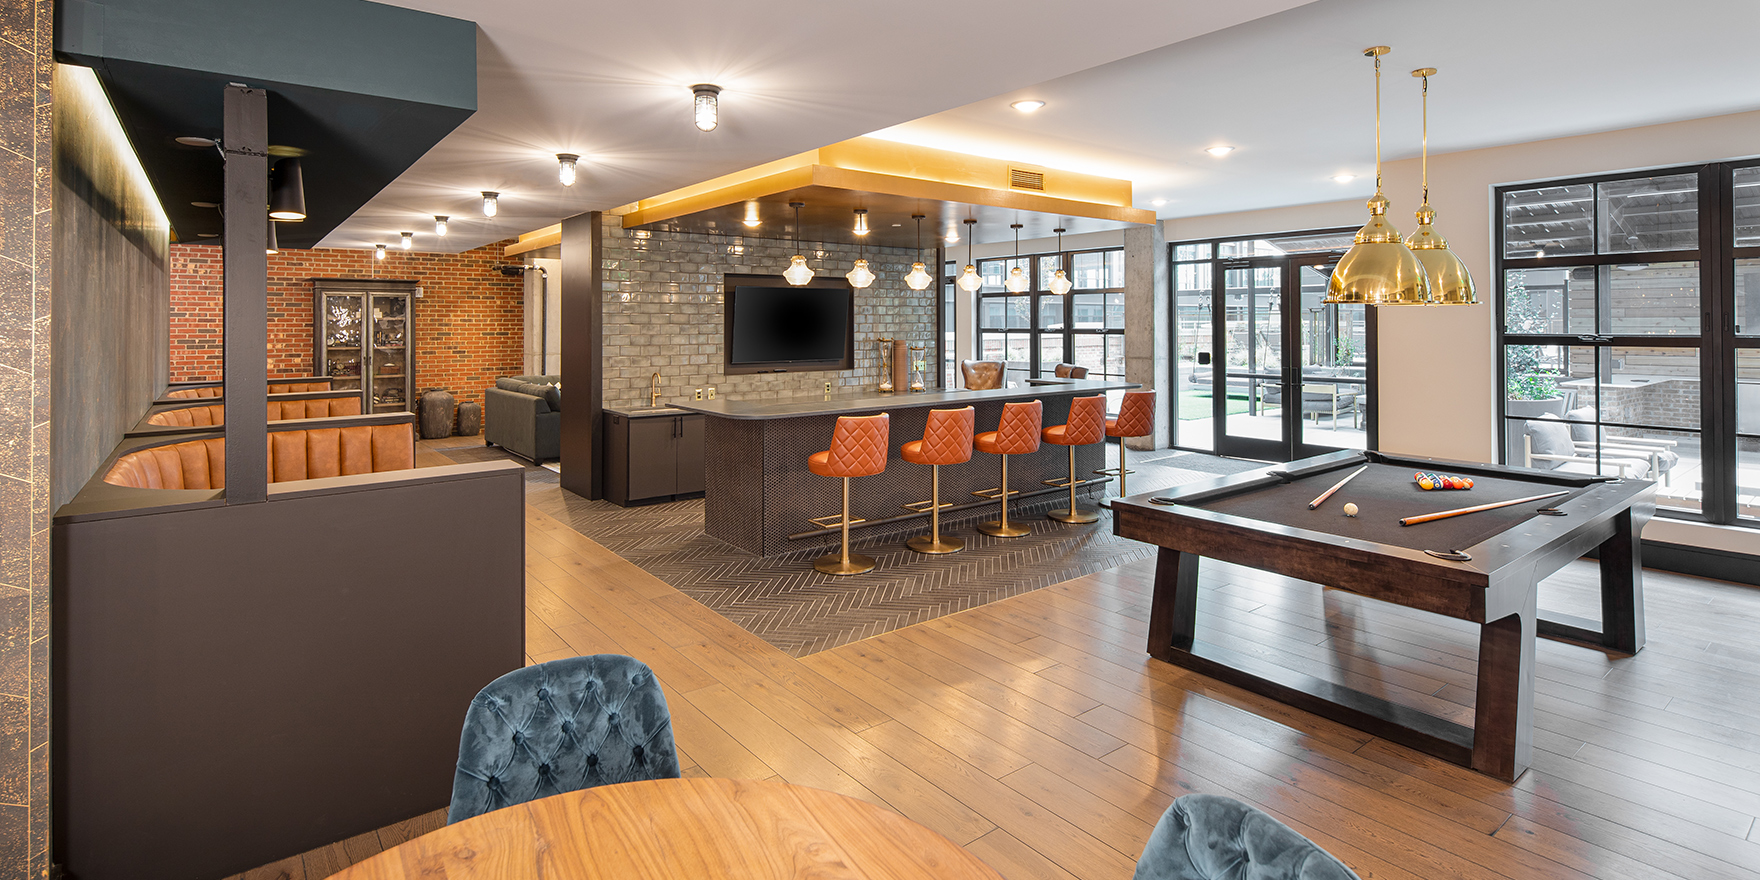 The Line clubroom kitchen area featuring a pool table, booth seating, and seating along the bar